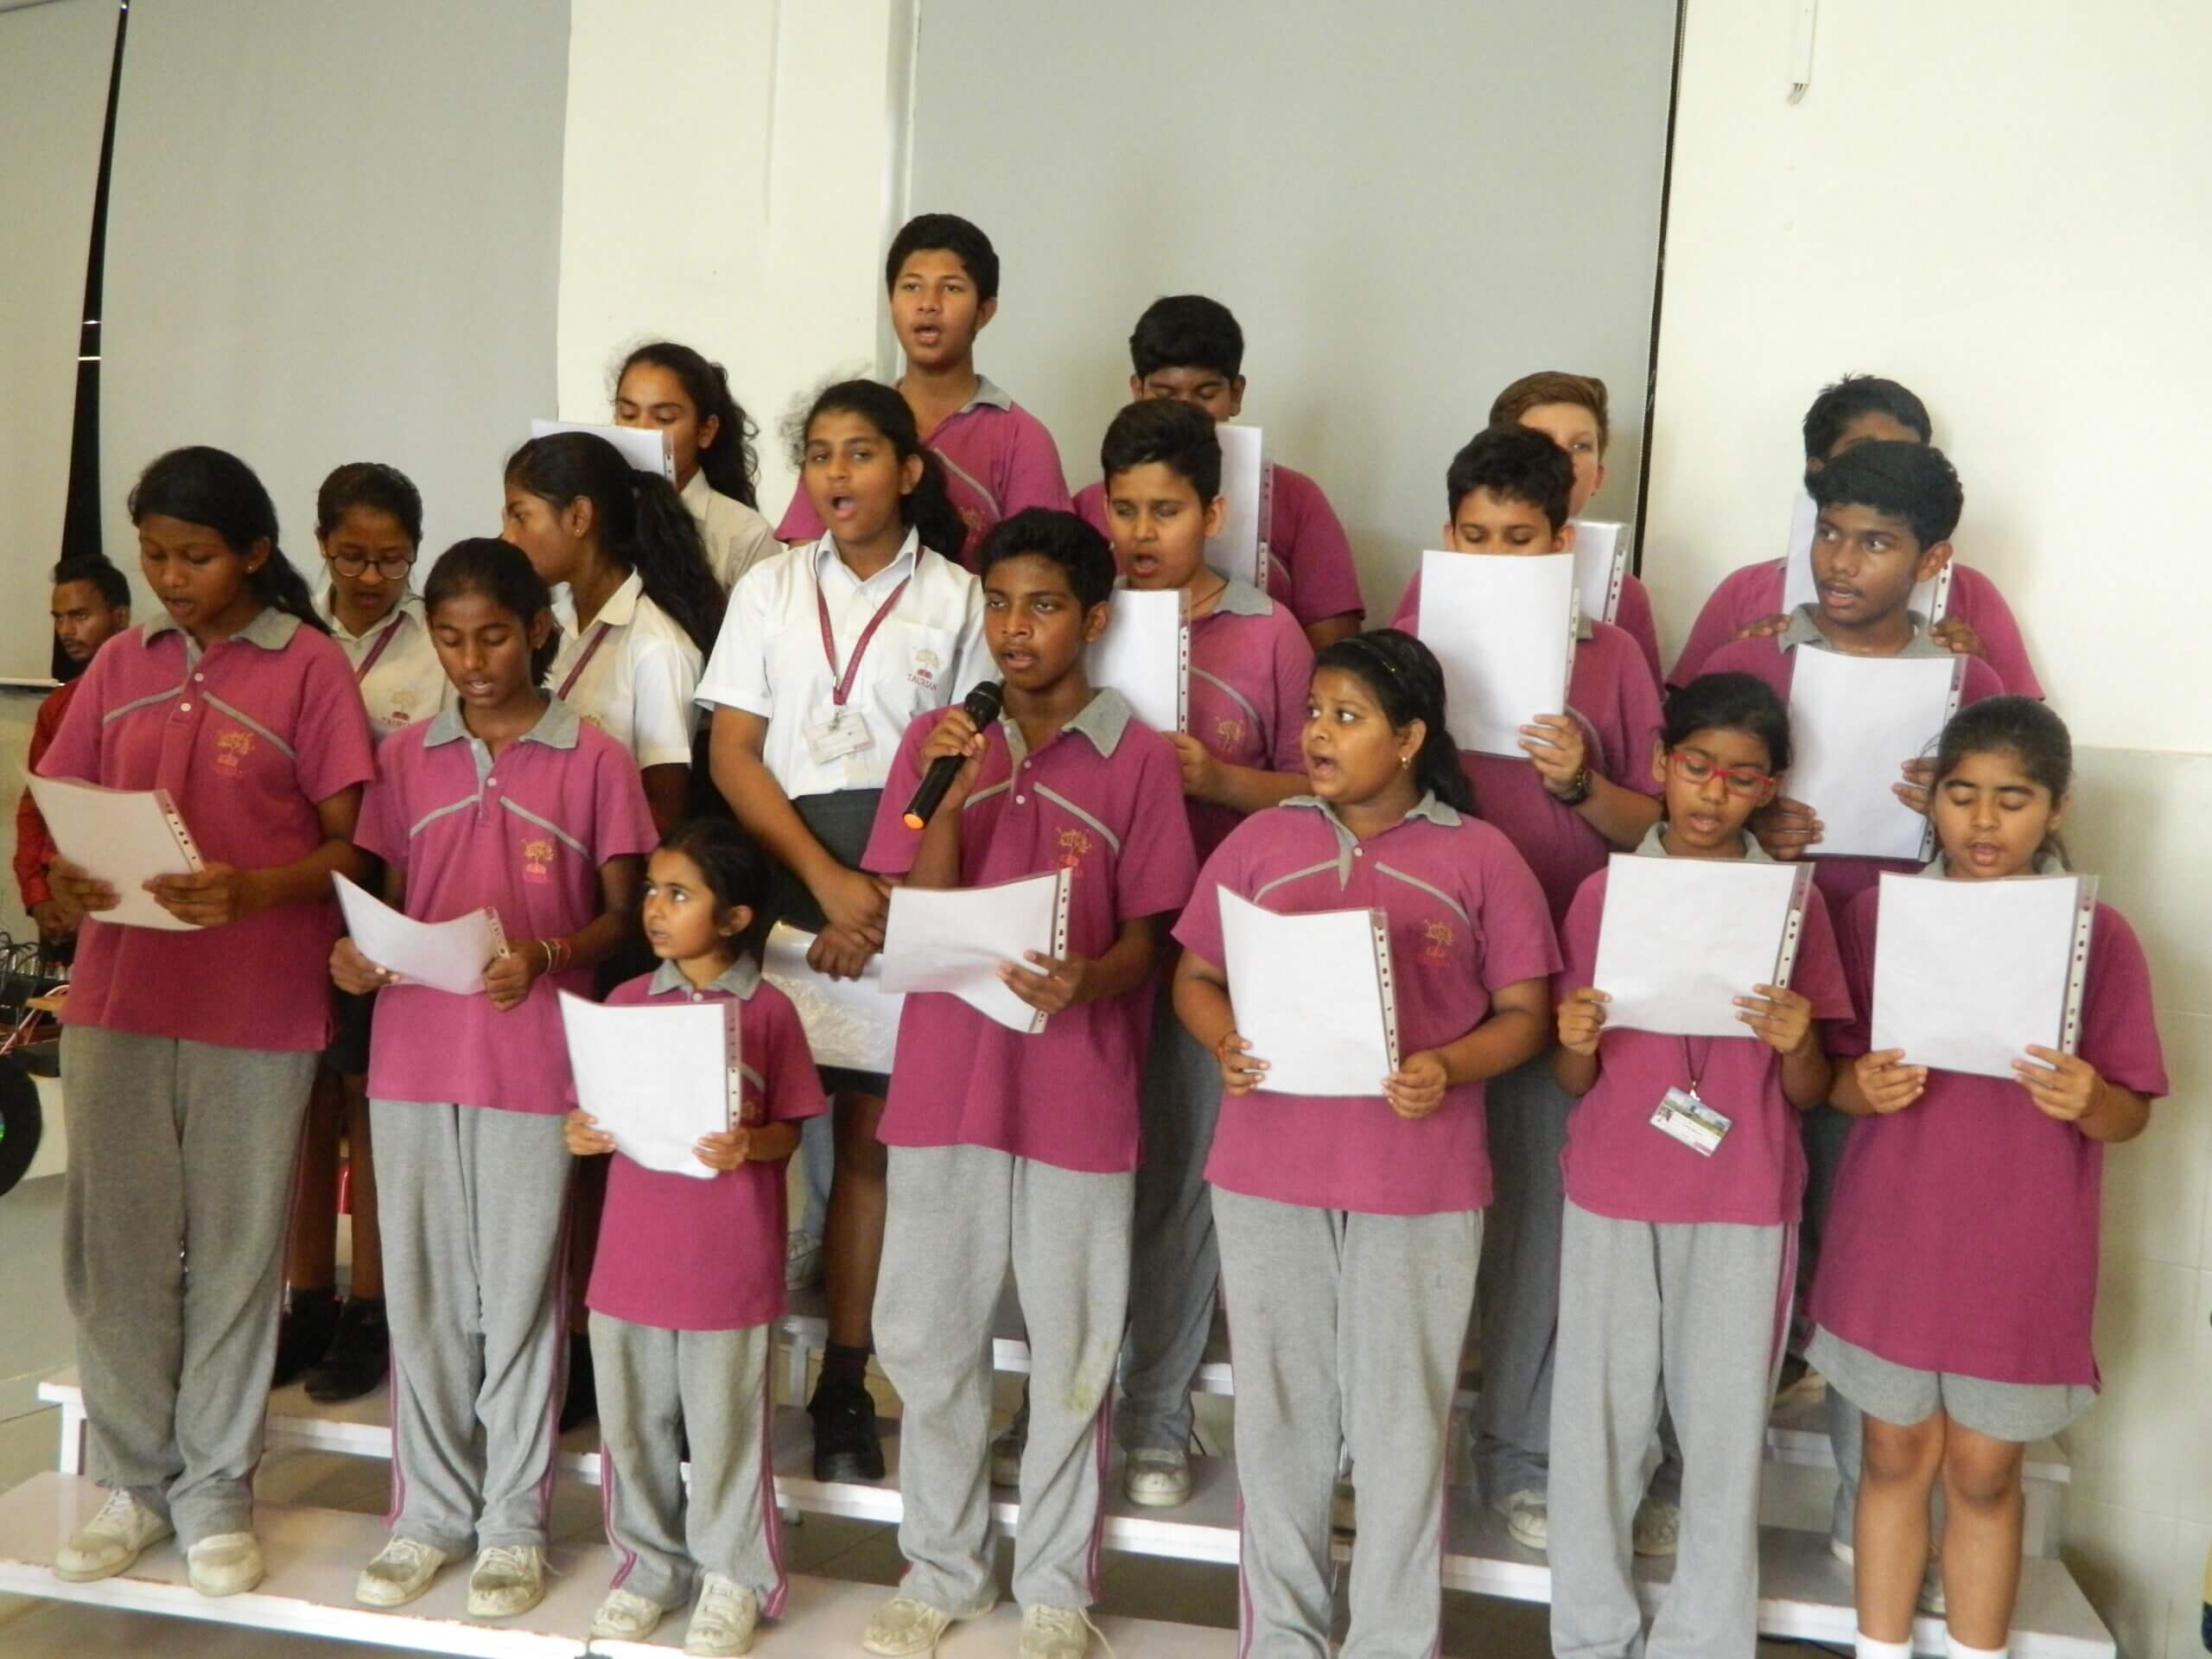 Taurian Center of Excellence – A Child Centric Life Skills Program launched on 14th April 2018